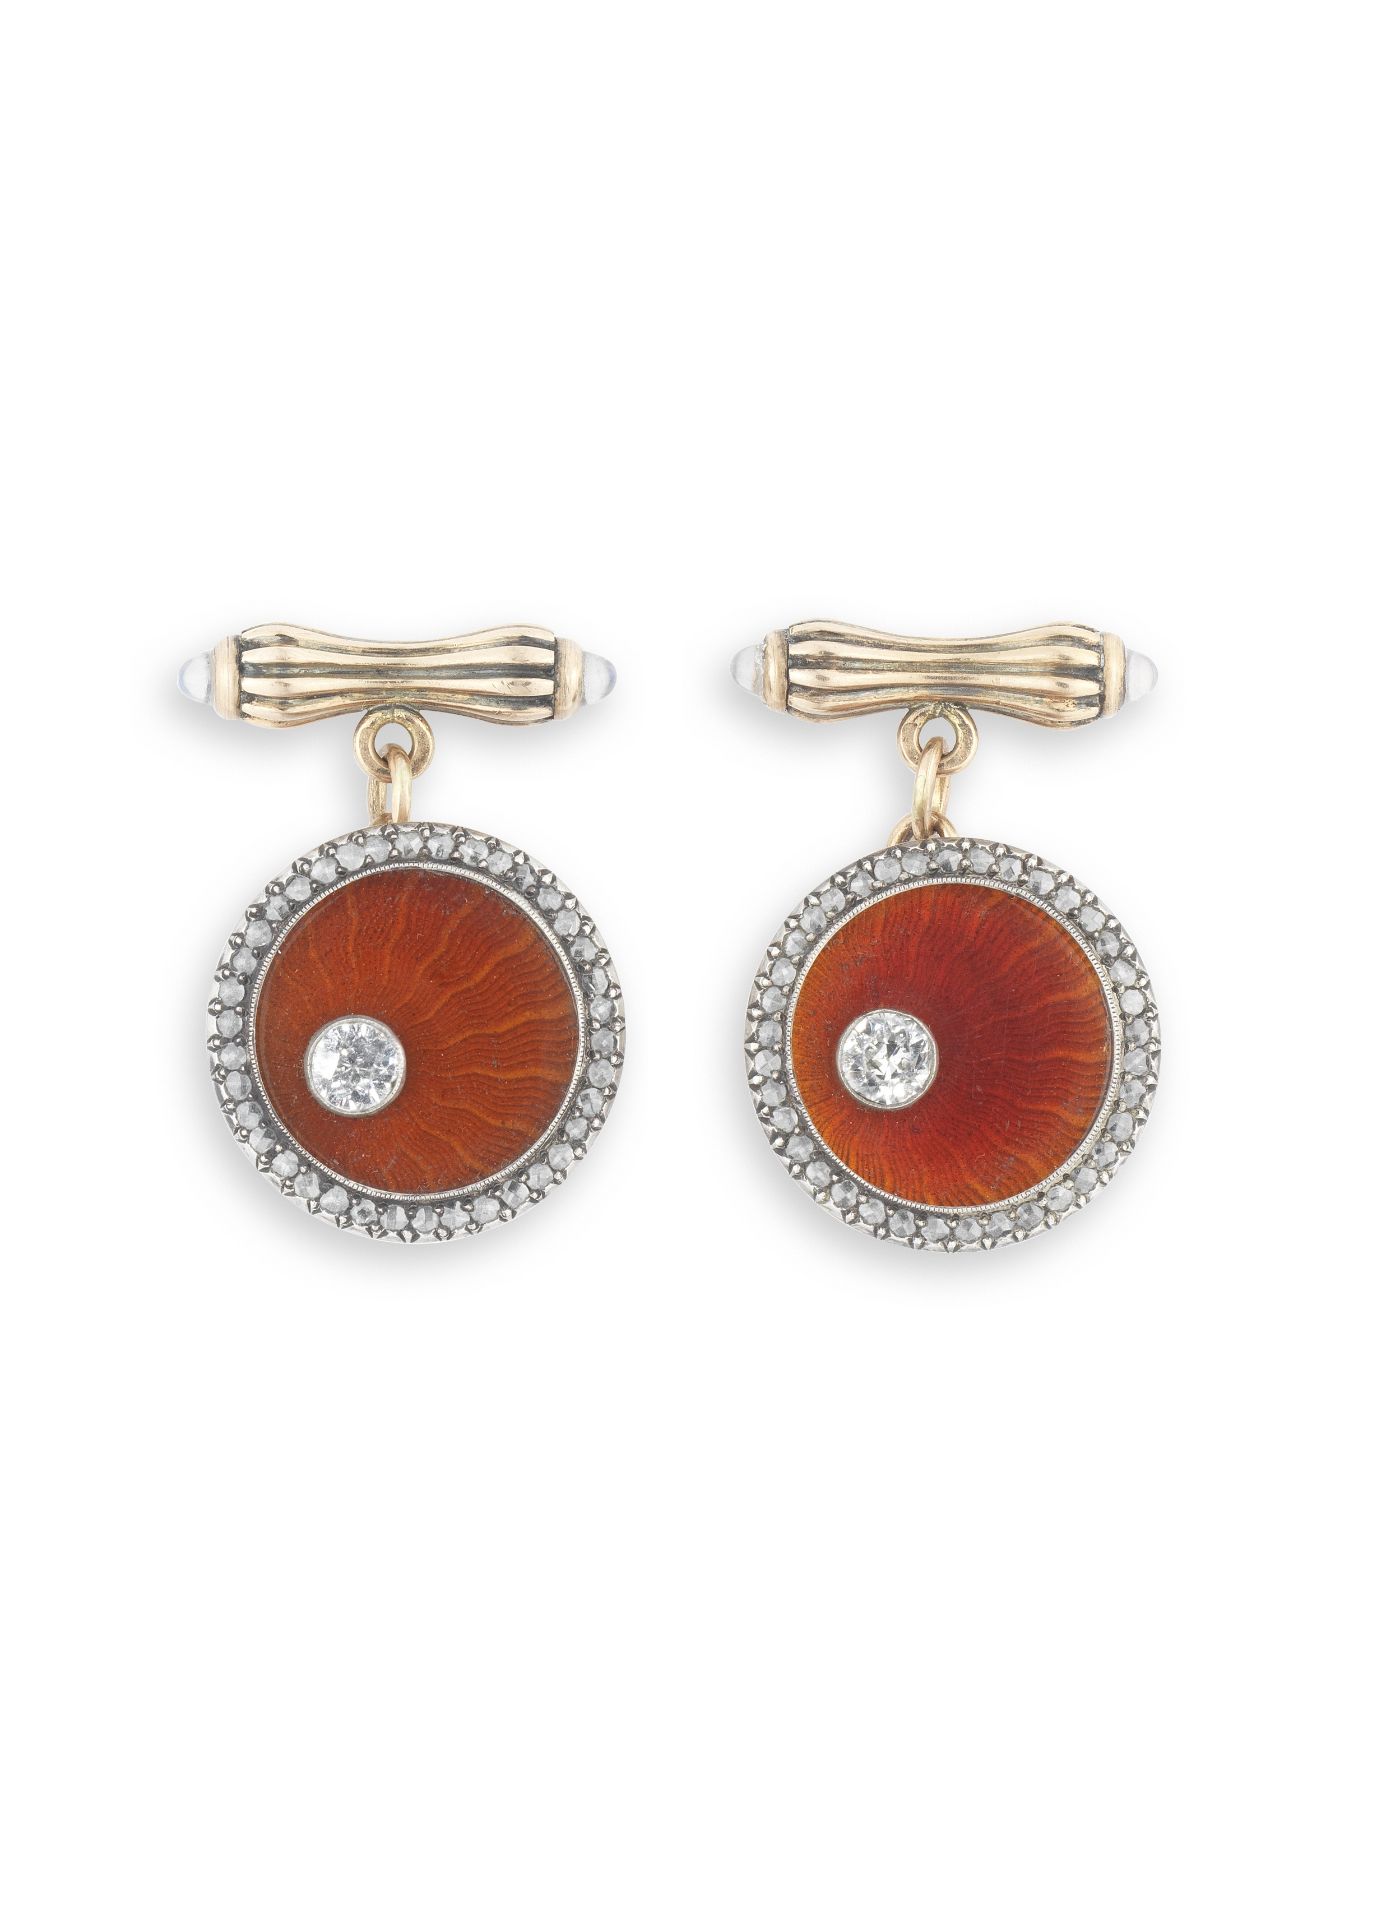 A pair of diamond-set rose-gold and enamel guilloché cufflinksFabergé, workmaster August Hollming...